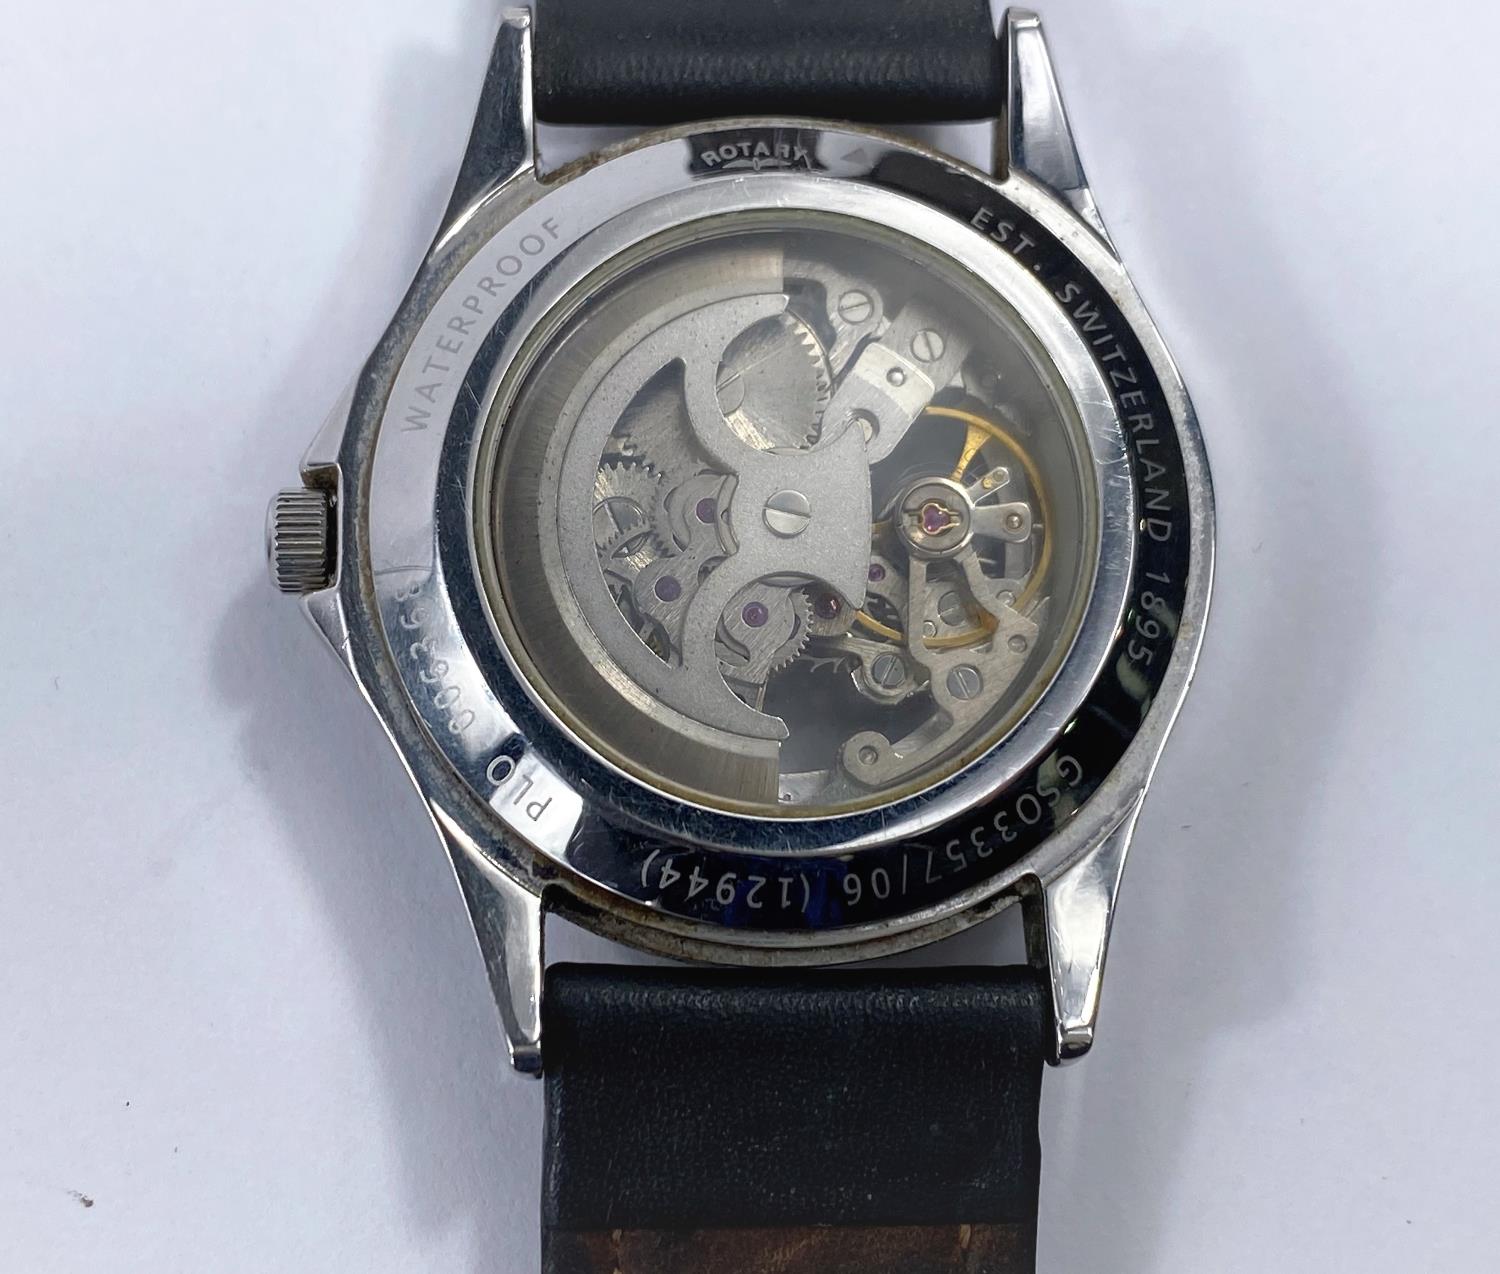 A Rotary Automatic skeleton face open back gent's wrist watch on black leather strap - Image 2 of 4